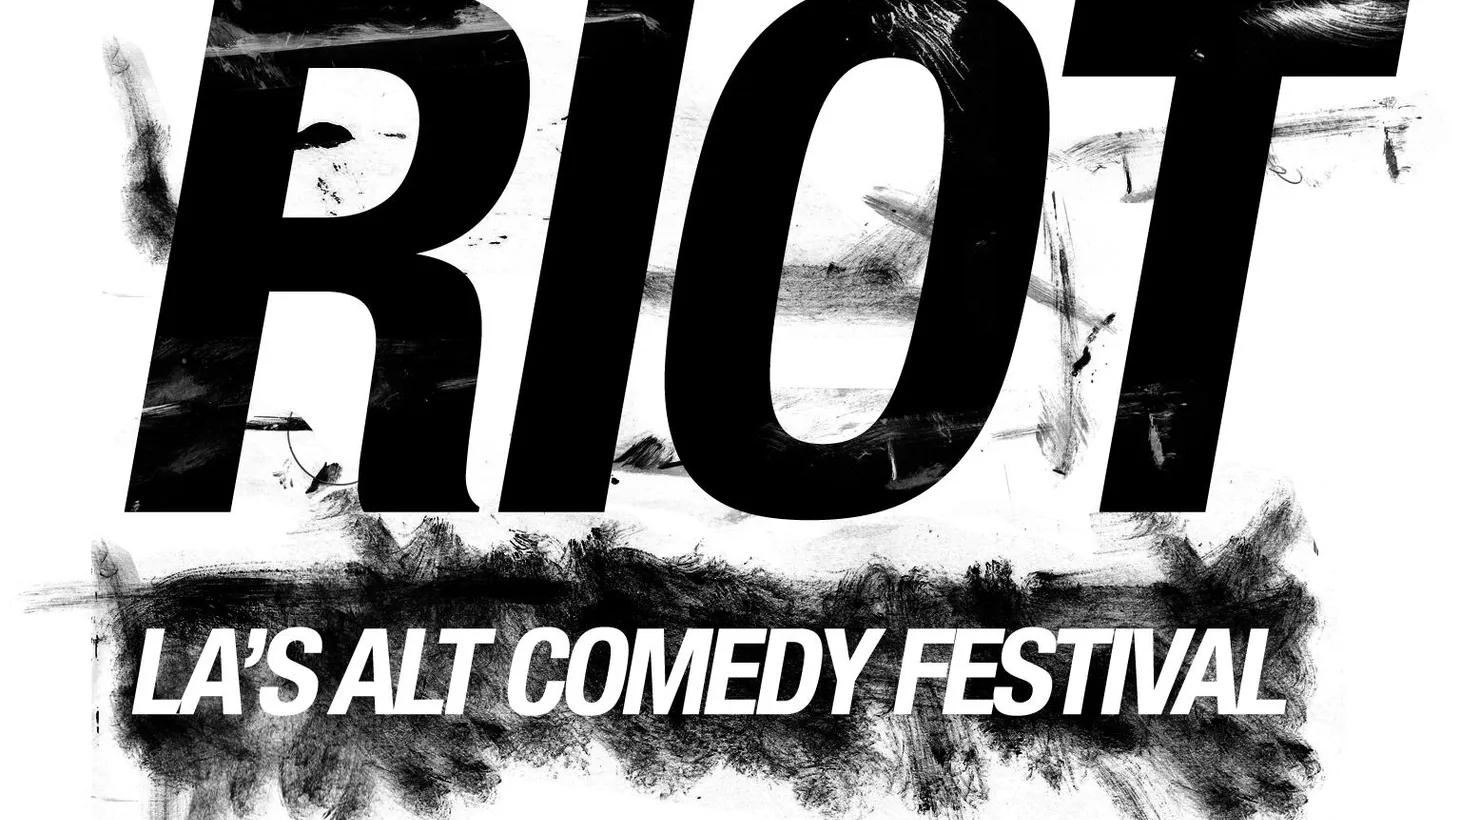 A recording from KCRW's showcase at Riot, LA's newest comedy festival.